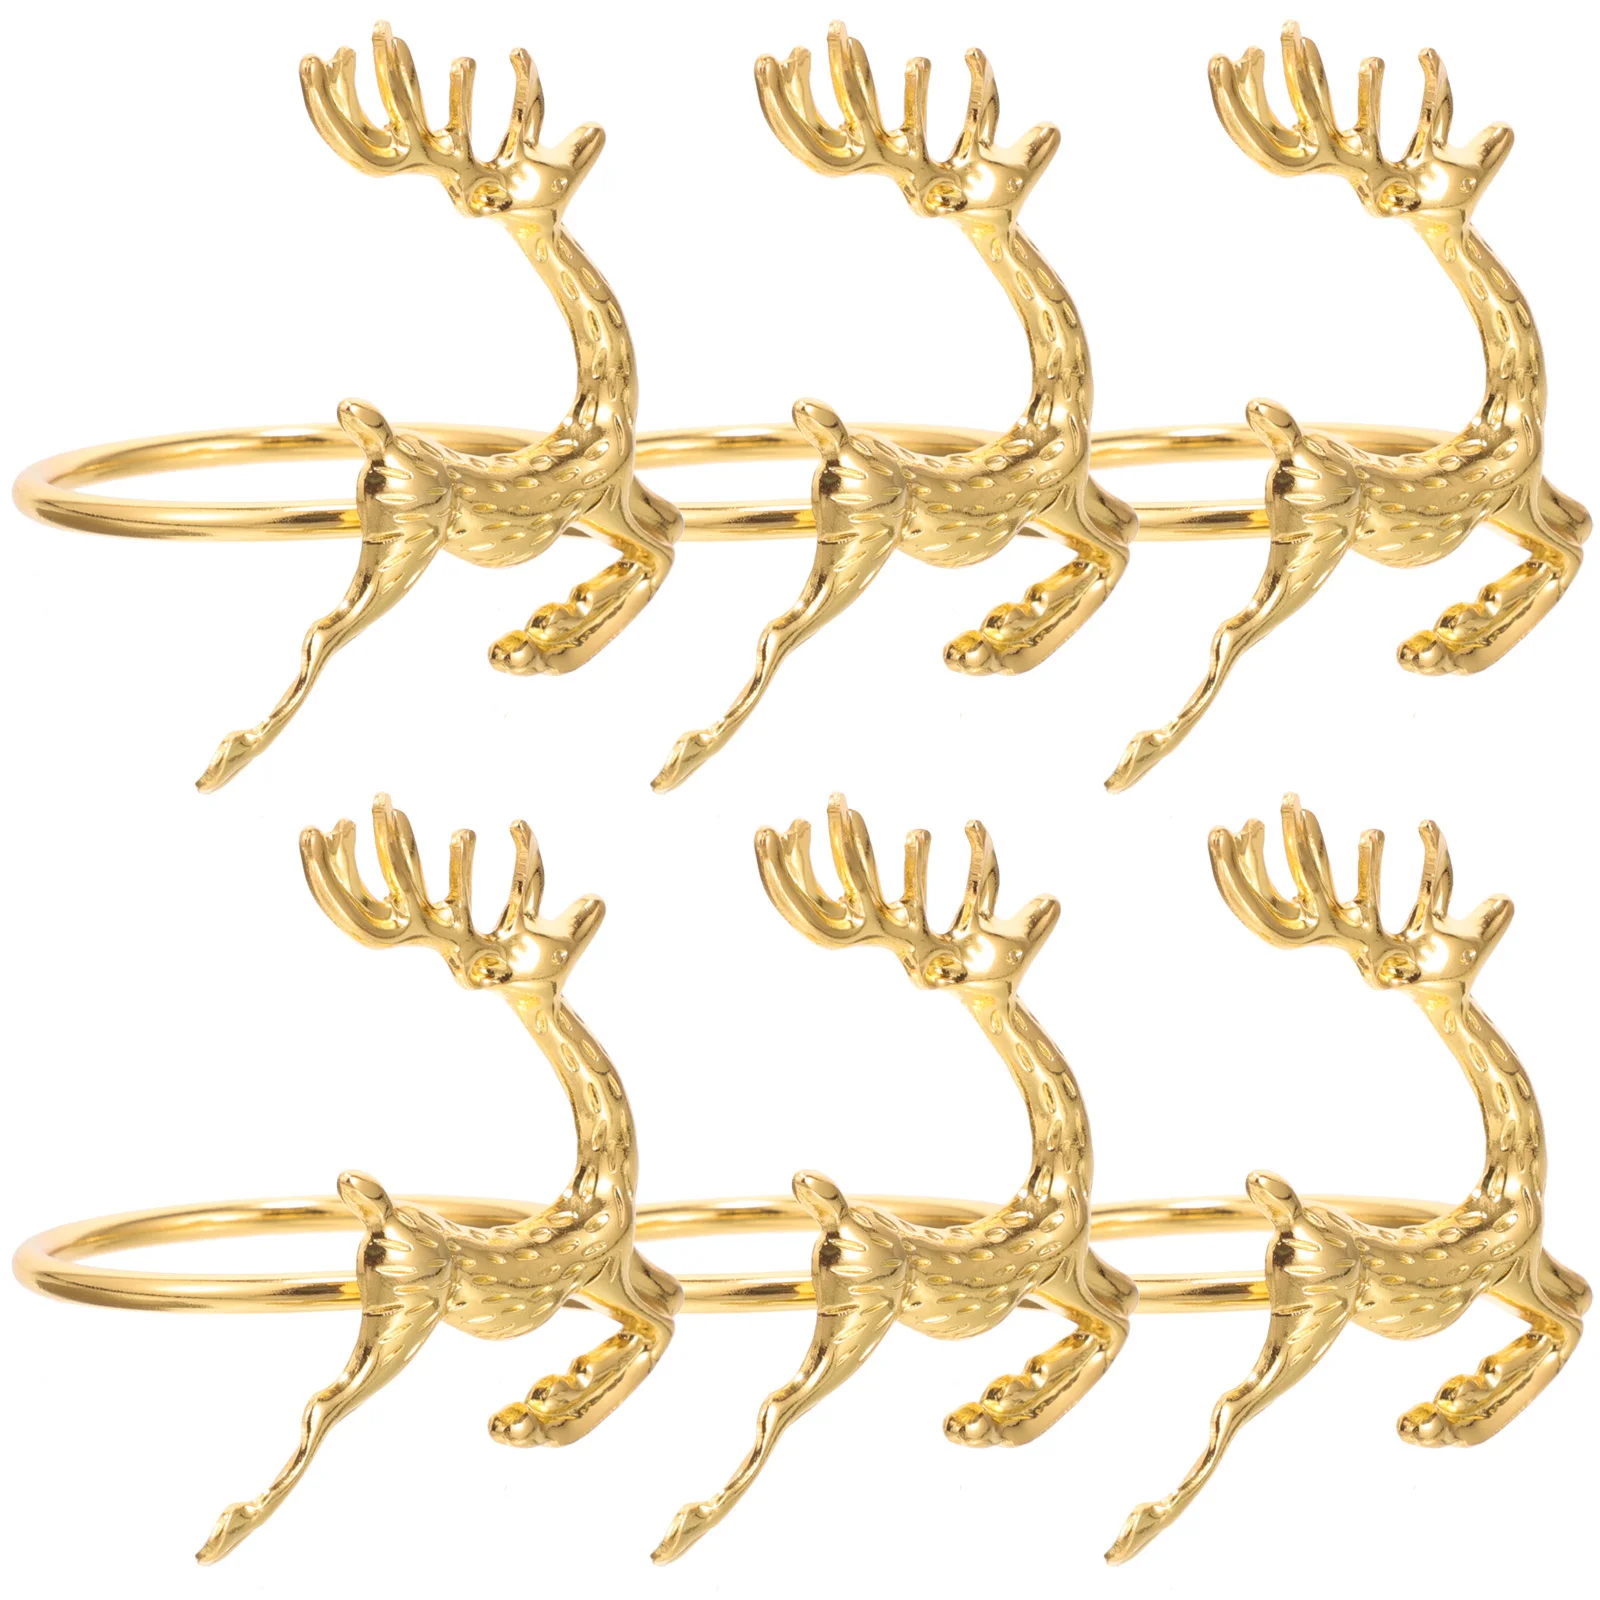 

6 Pcs Elegant Napkin Ring Decor Ornaments Hotel Holders Cutlery Dining Table Decorate Deer Shaped